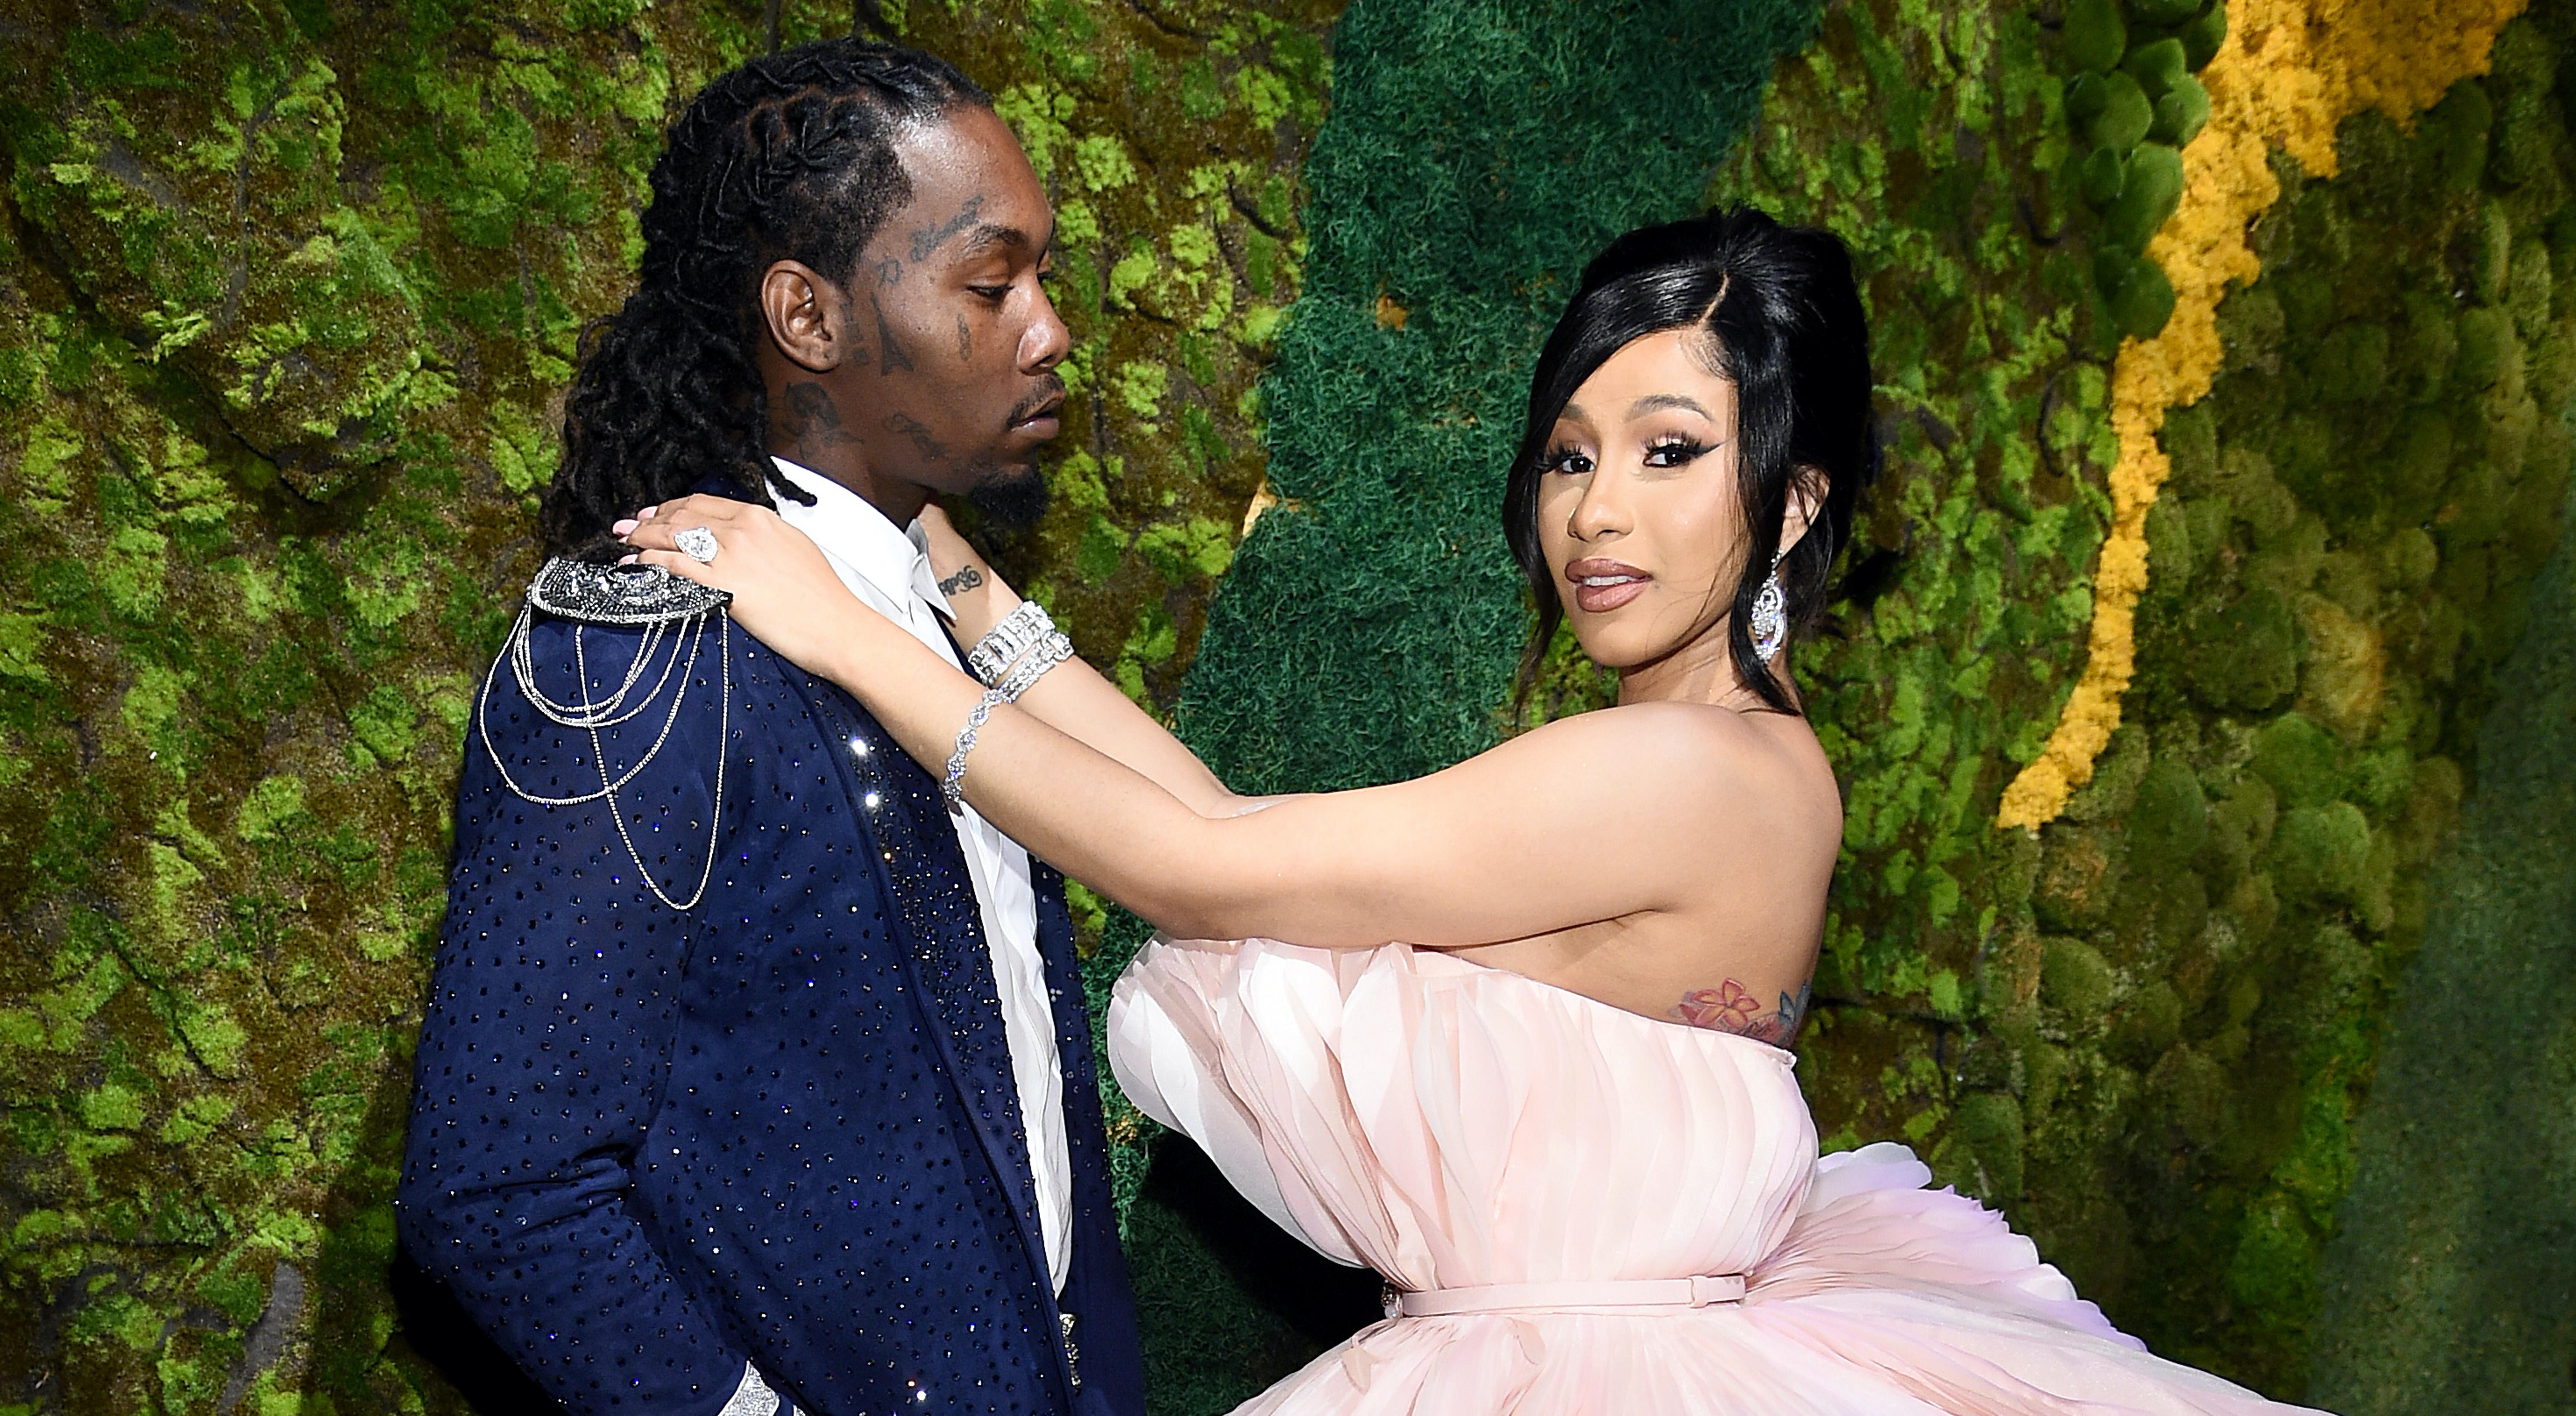 Offset and Cardi B